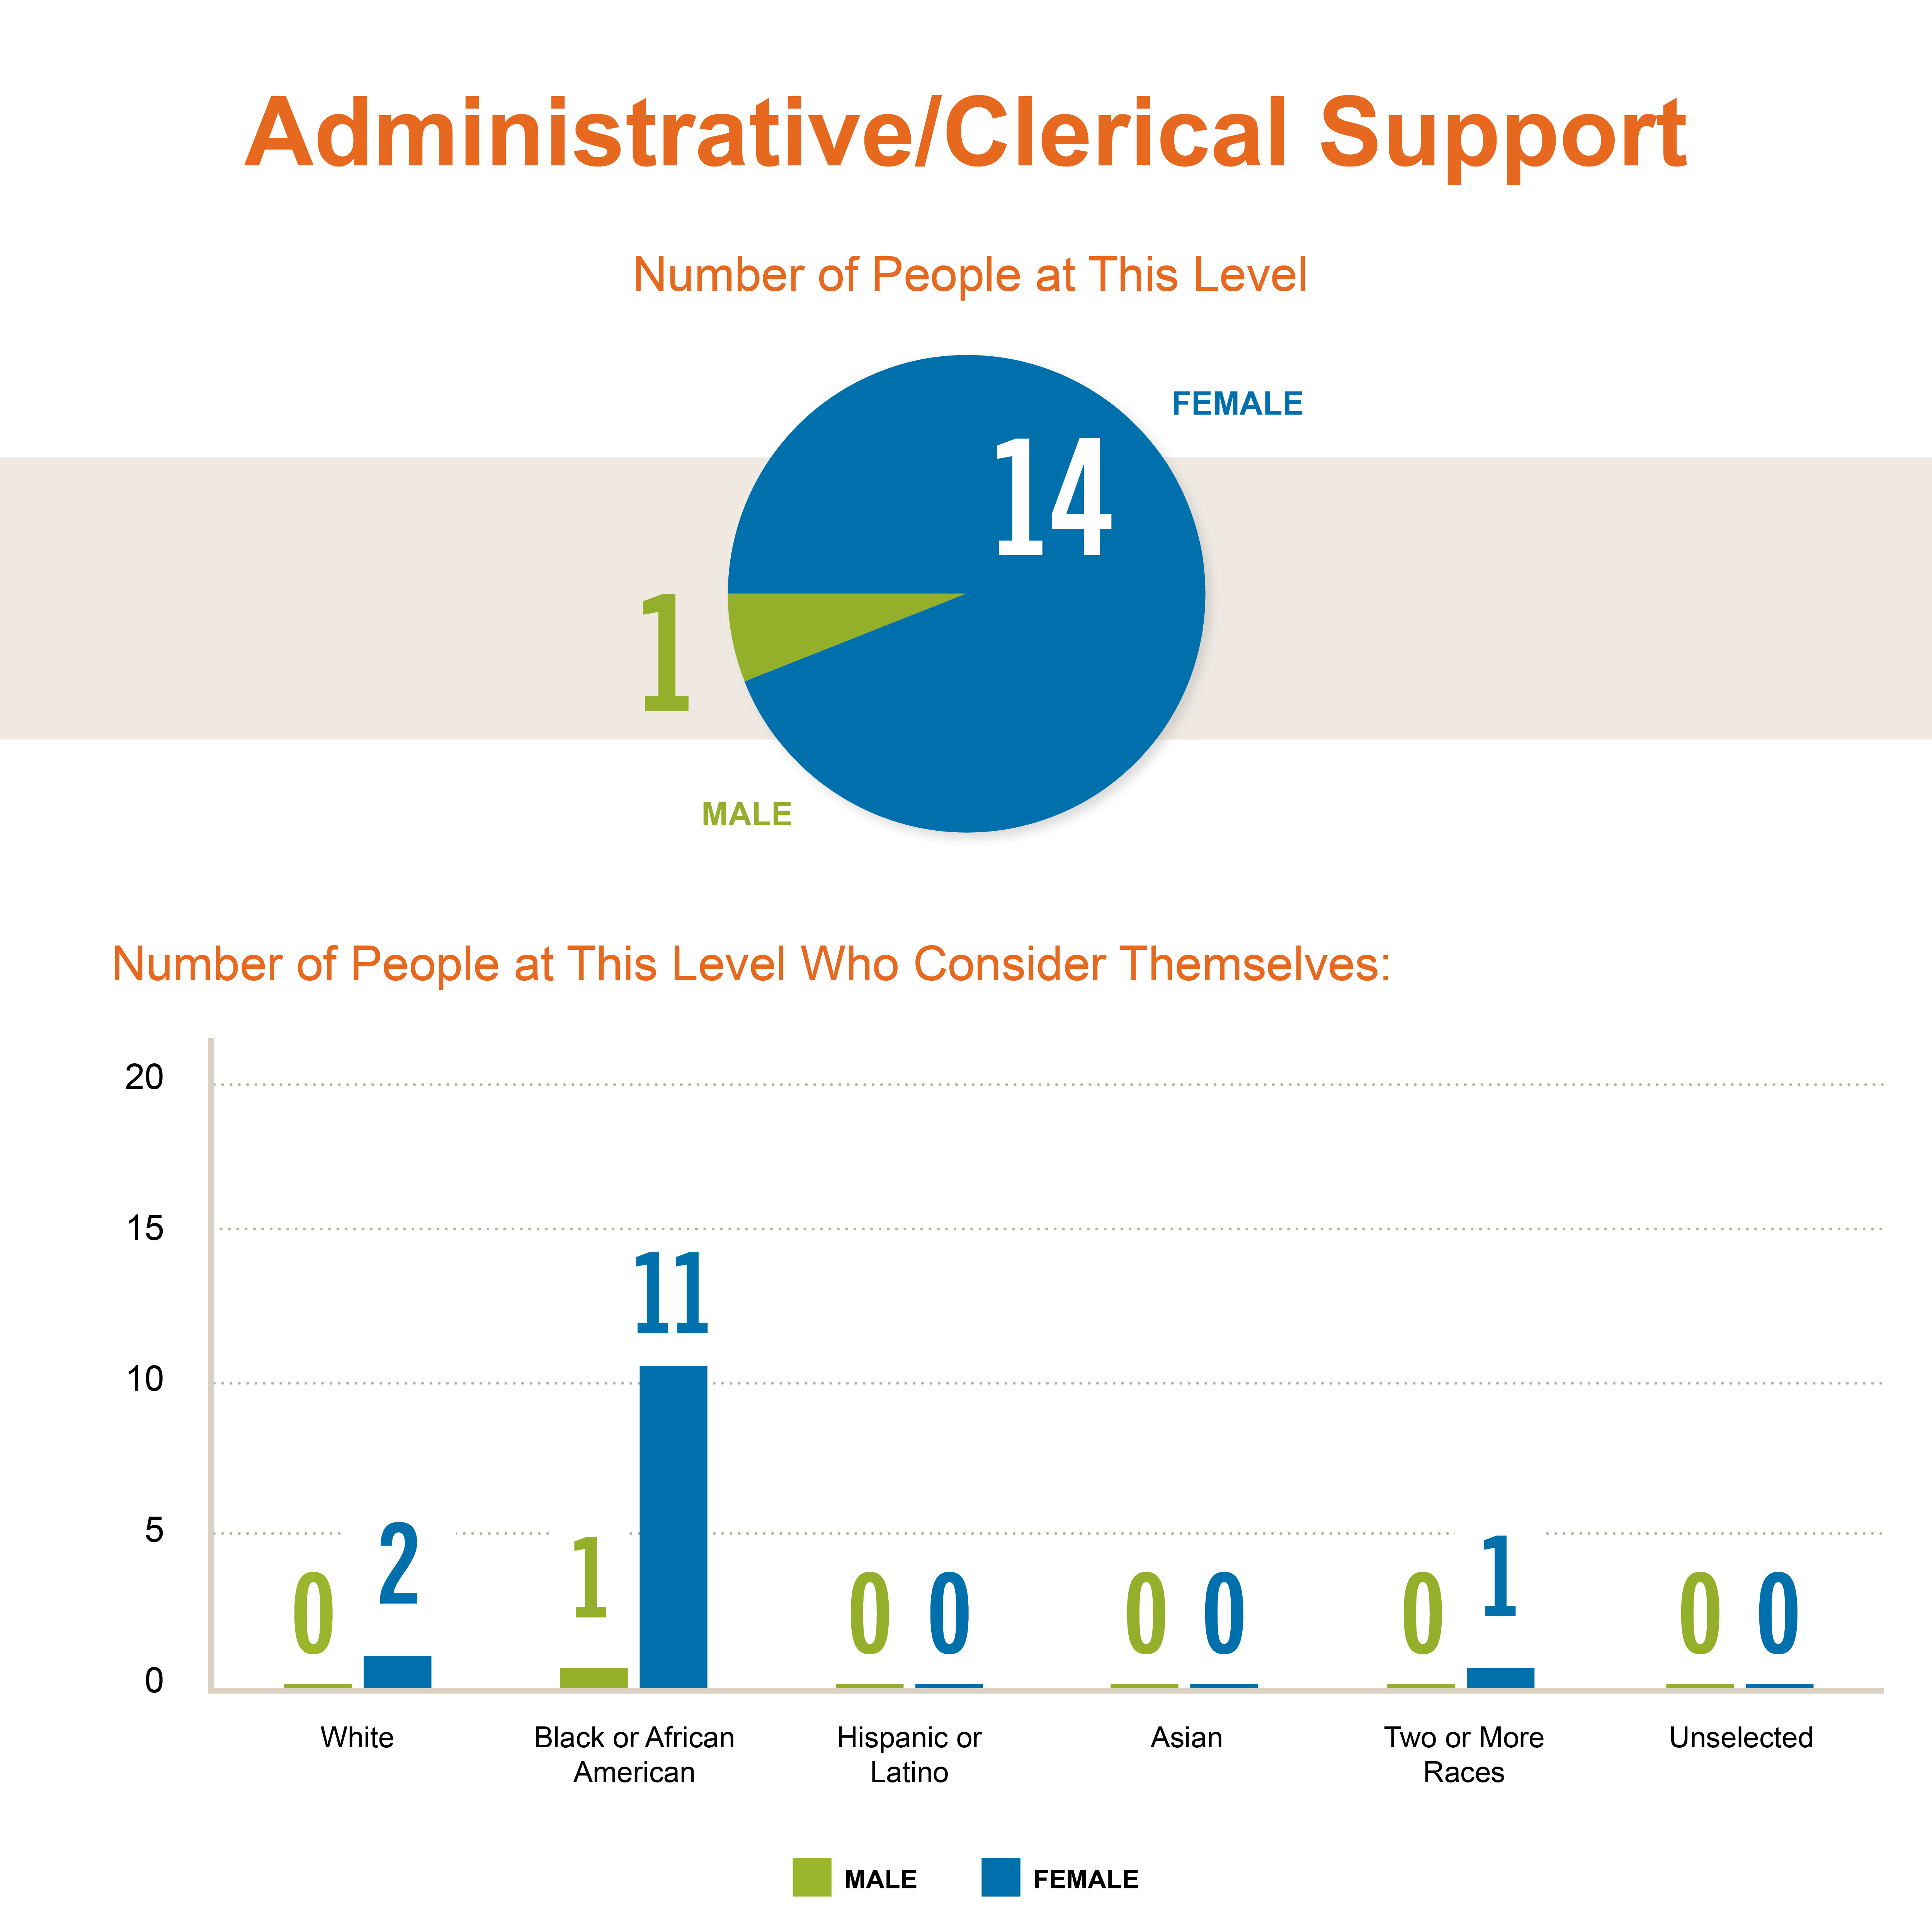 Administrative/clerical support, number of people at this level